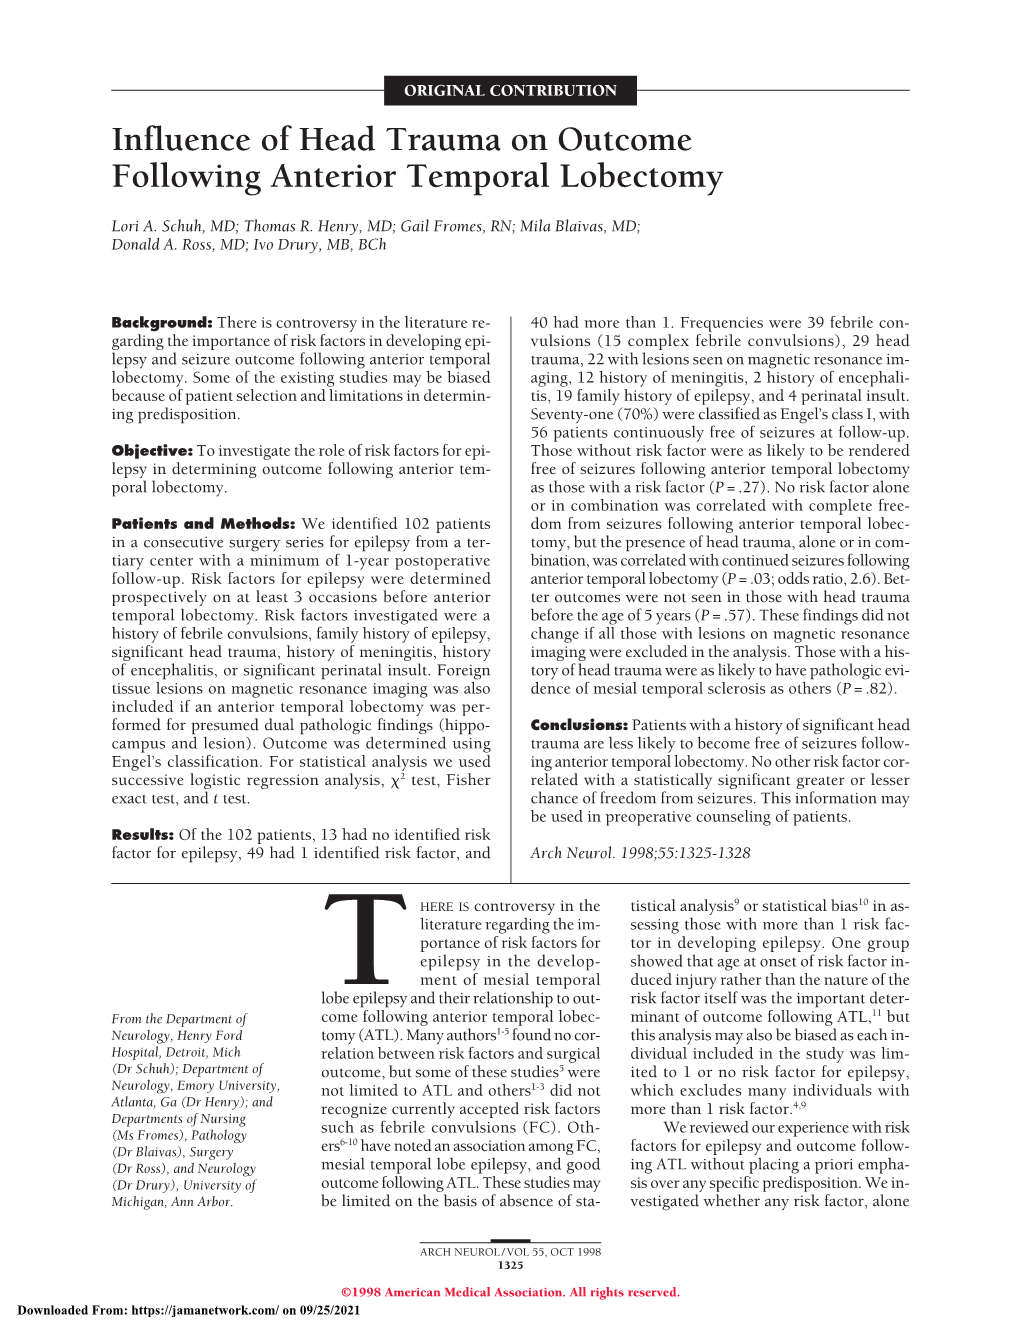 Influence of Head Trauma on Outcome Following Anterior Temporal Lobectomy